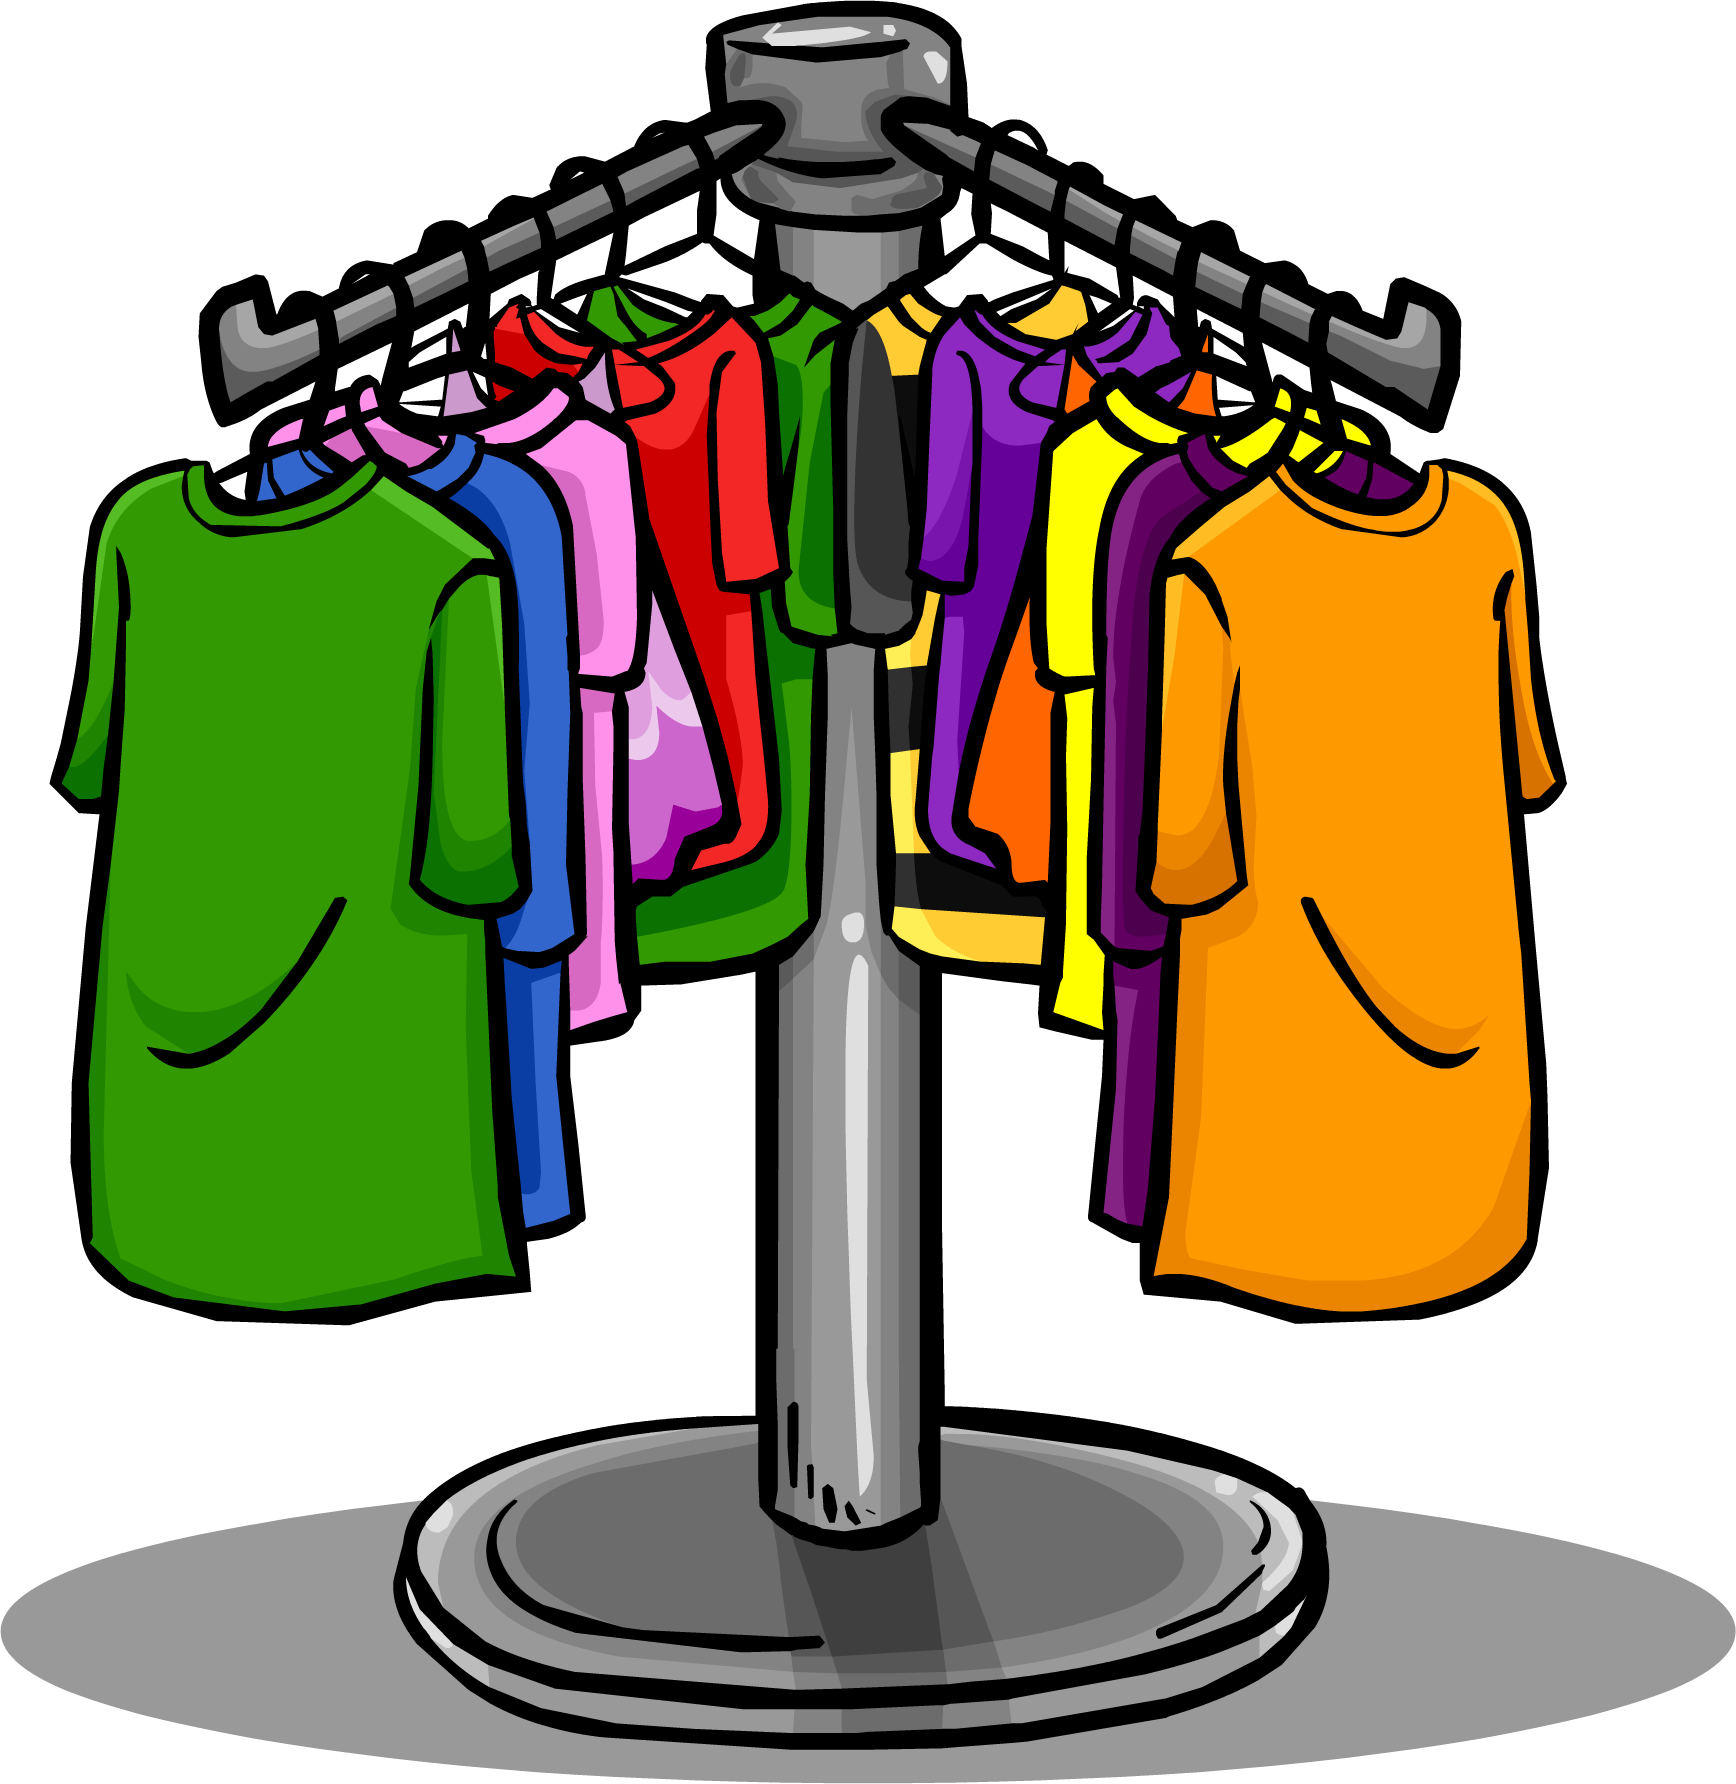 A Group Of Colorful Shirts On A Rack